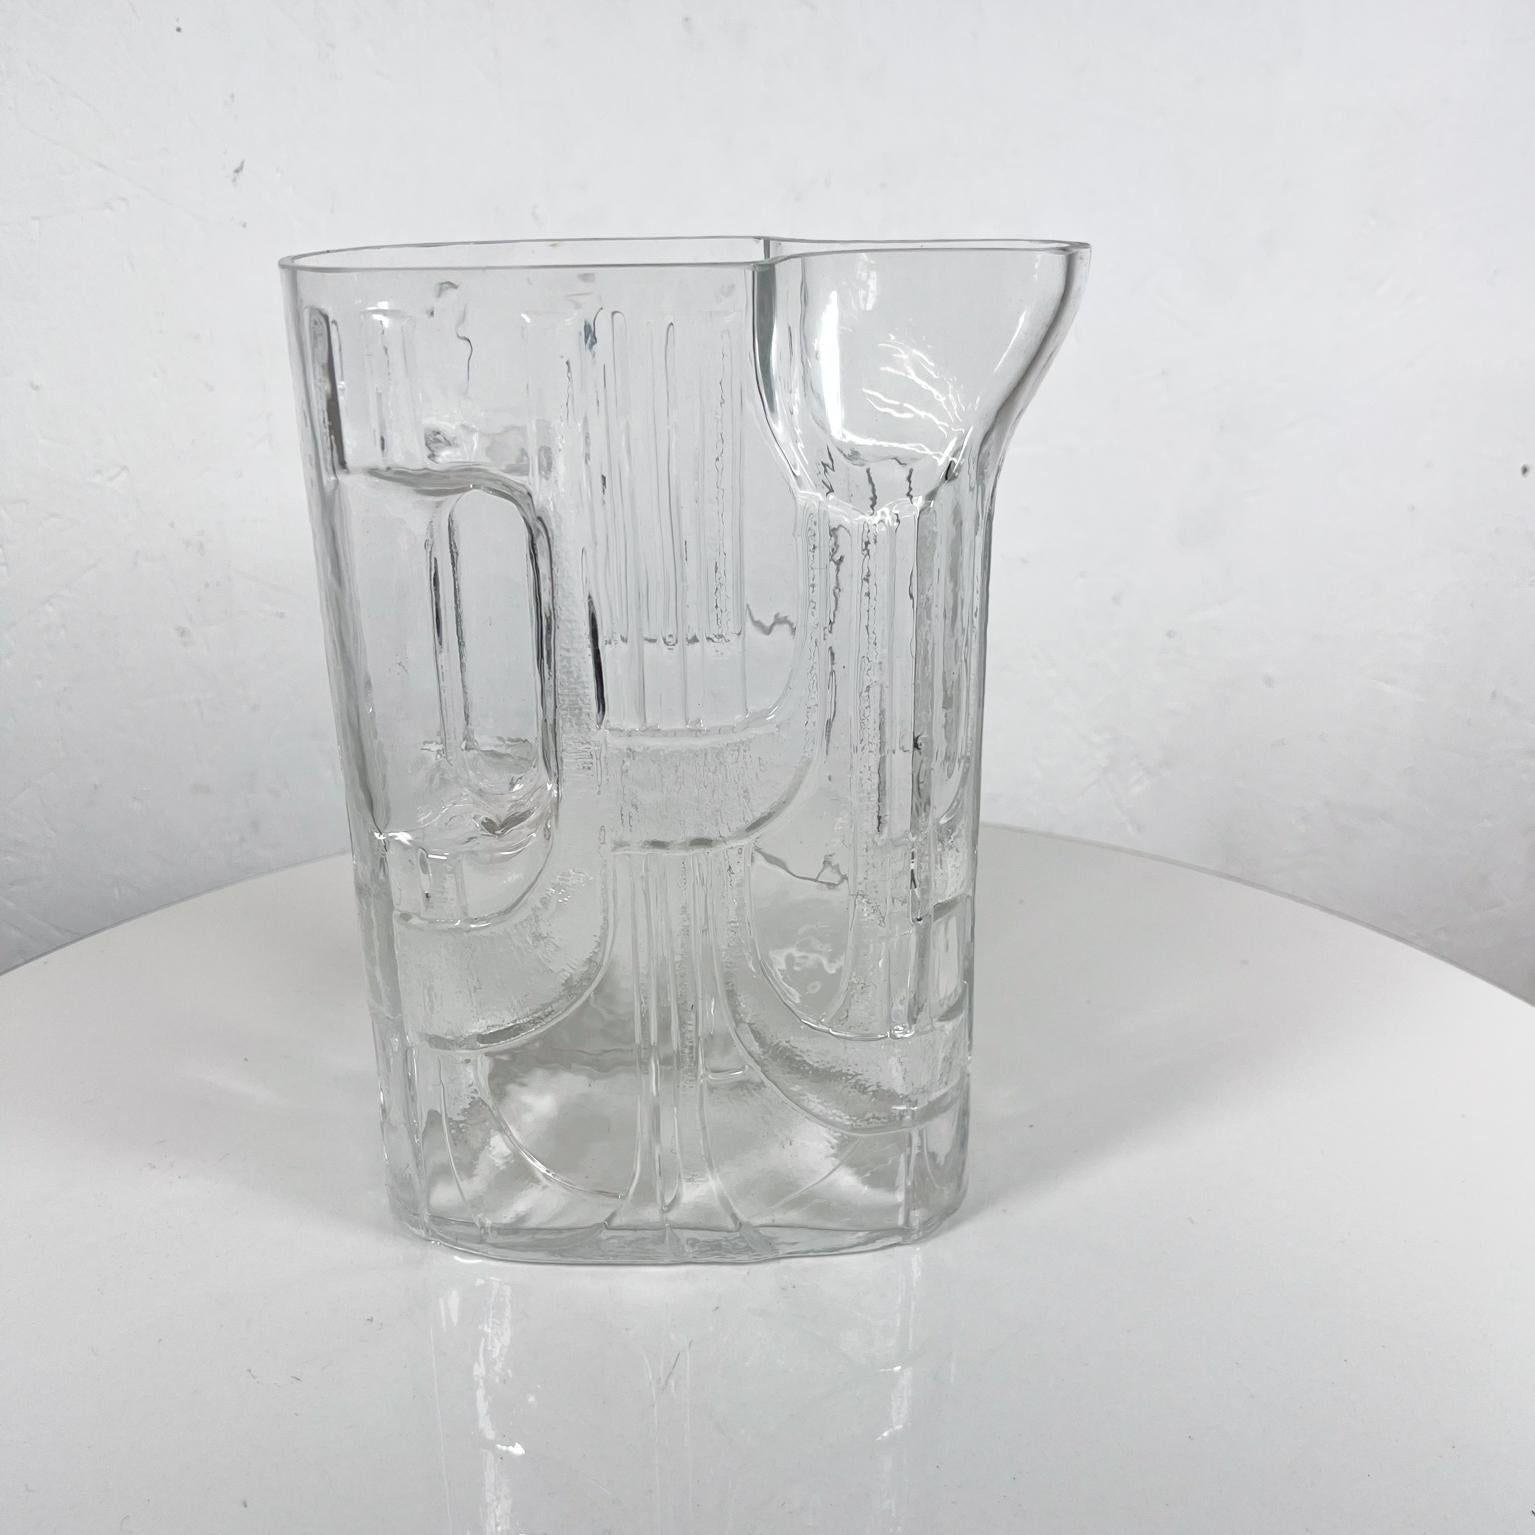 1960s Modernist Pitcher by C.J. Riedel for Riedel
Crystal Art Glass
Integrated Handle
Claus Josef Riedel
7 x 3.25 w x 10 h
Original preowned vintage, please refer to images.